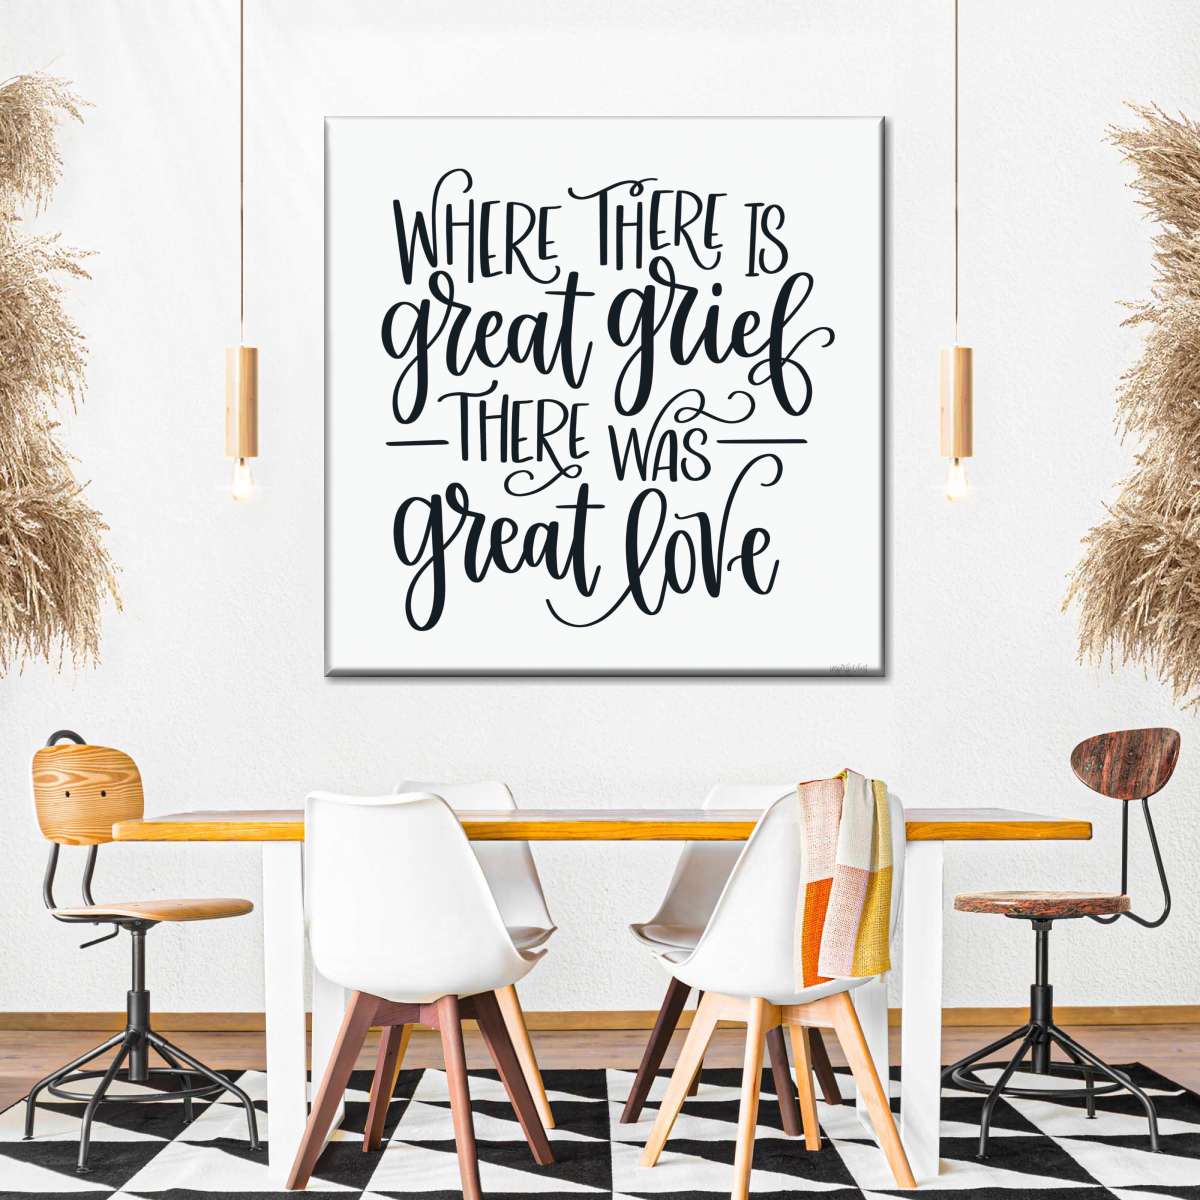 Great Love Square Canvas Wall Art - Christian Wall Decor - Christian Wall Hanging